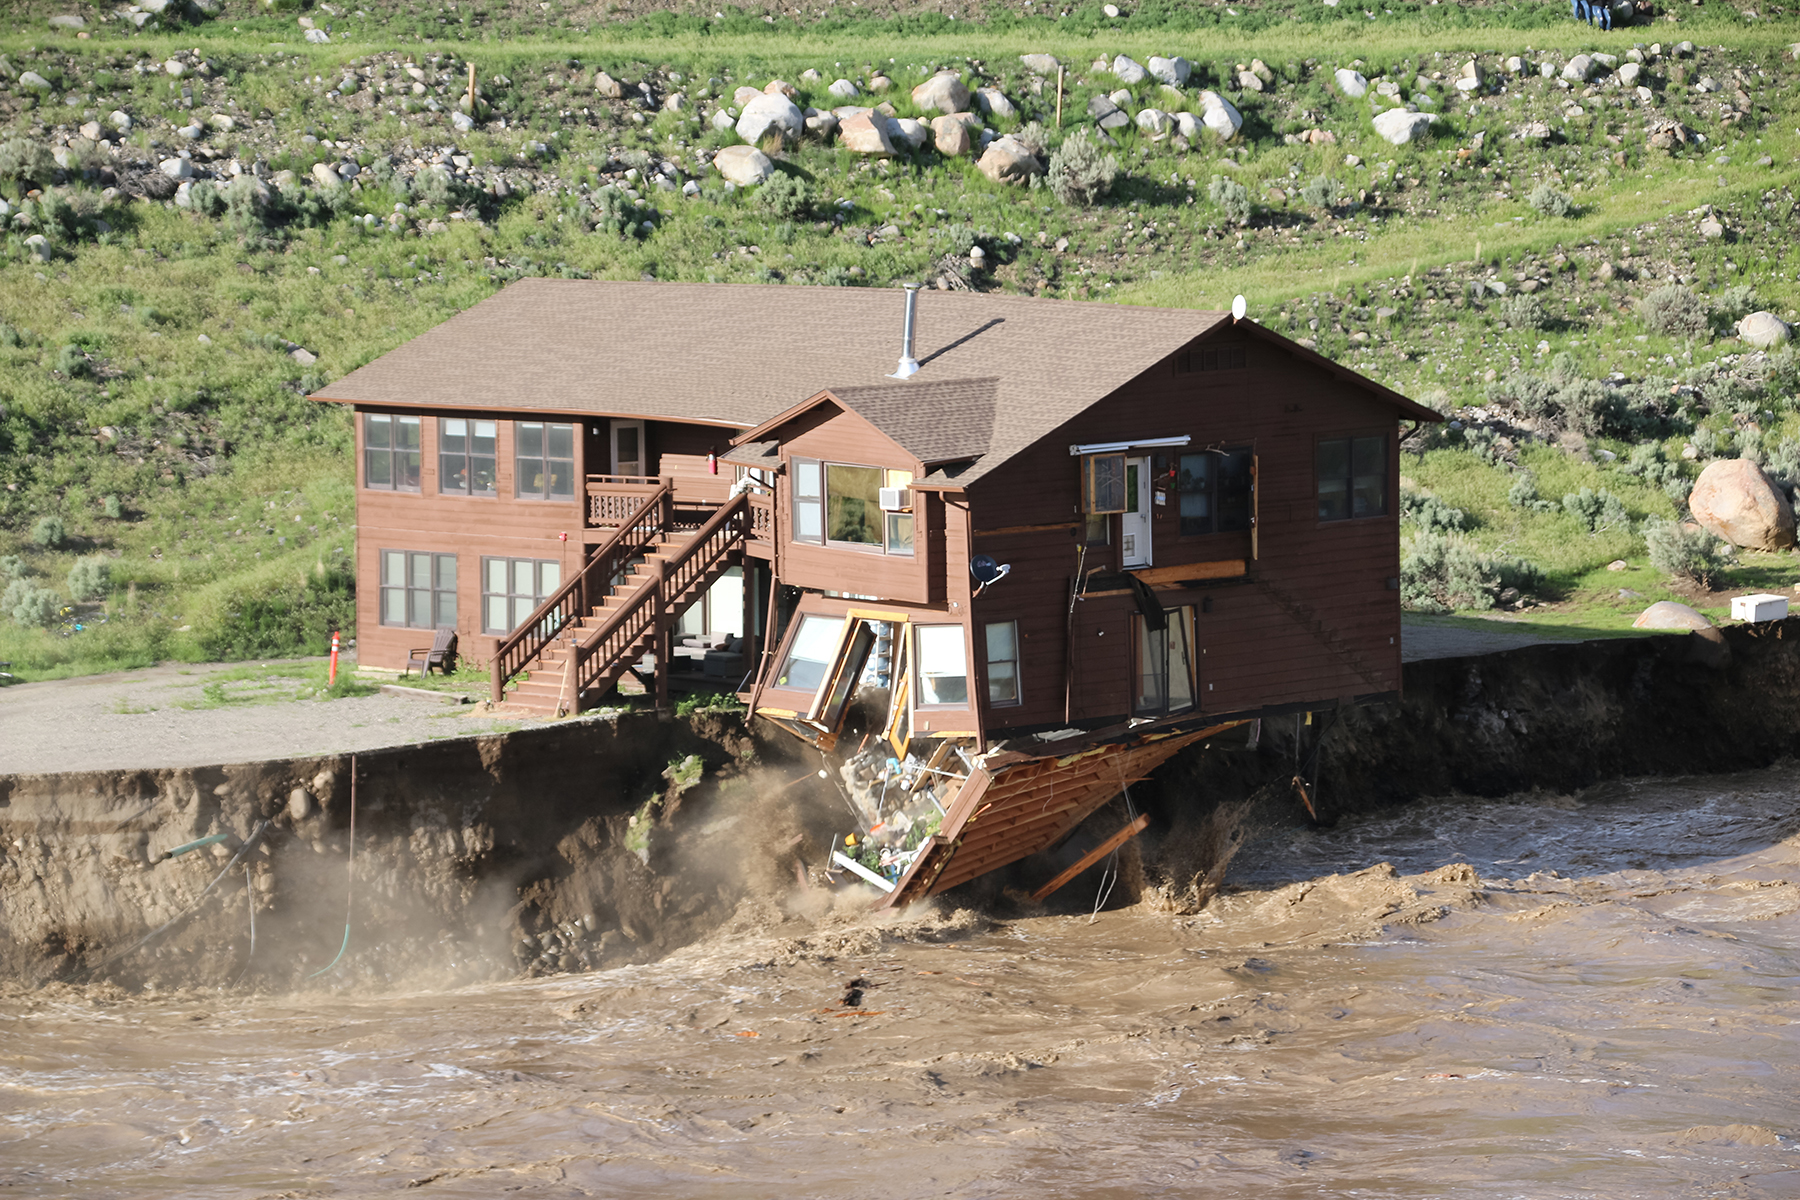 A building owned by the National Park Service and used for employee housing collapsed into the Yellowstone River just downstream of Gardiner, Montana, and was eventually swept away. (Photograph courtesy of Gina Riquier)